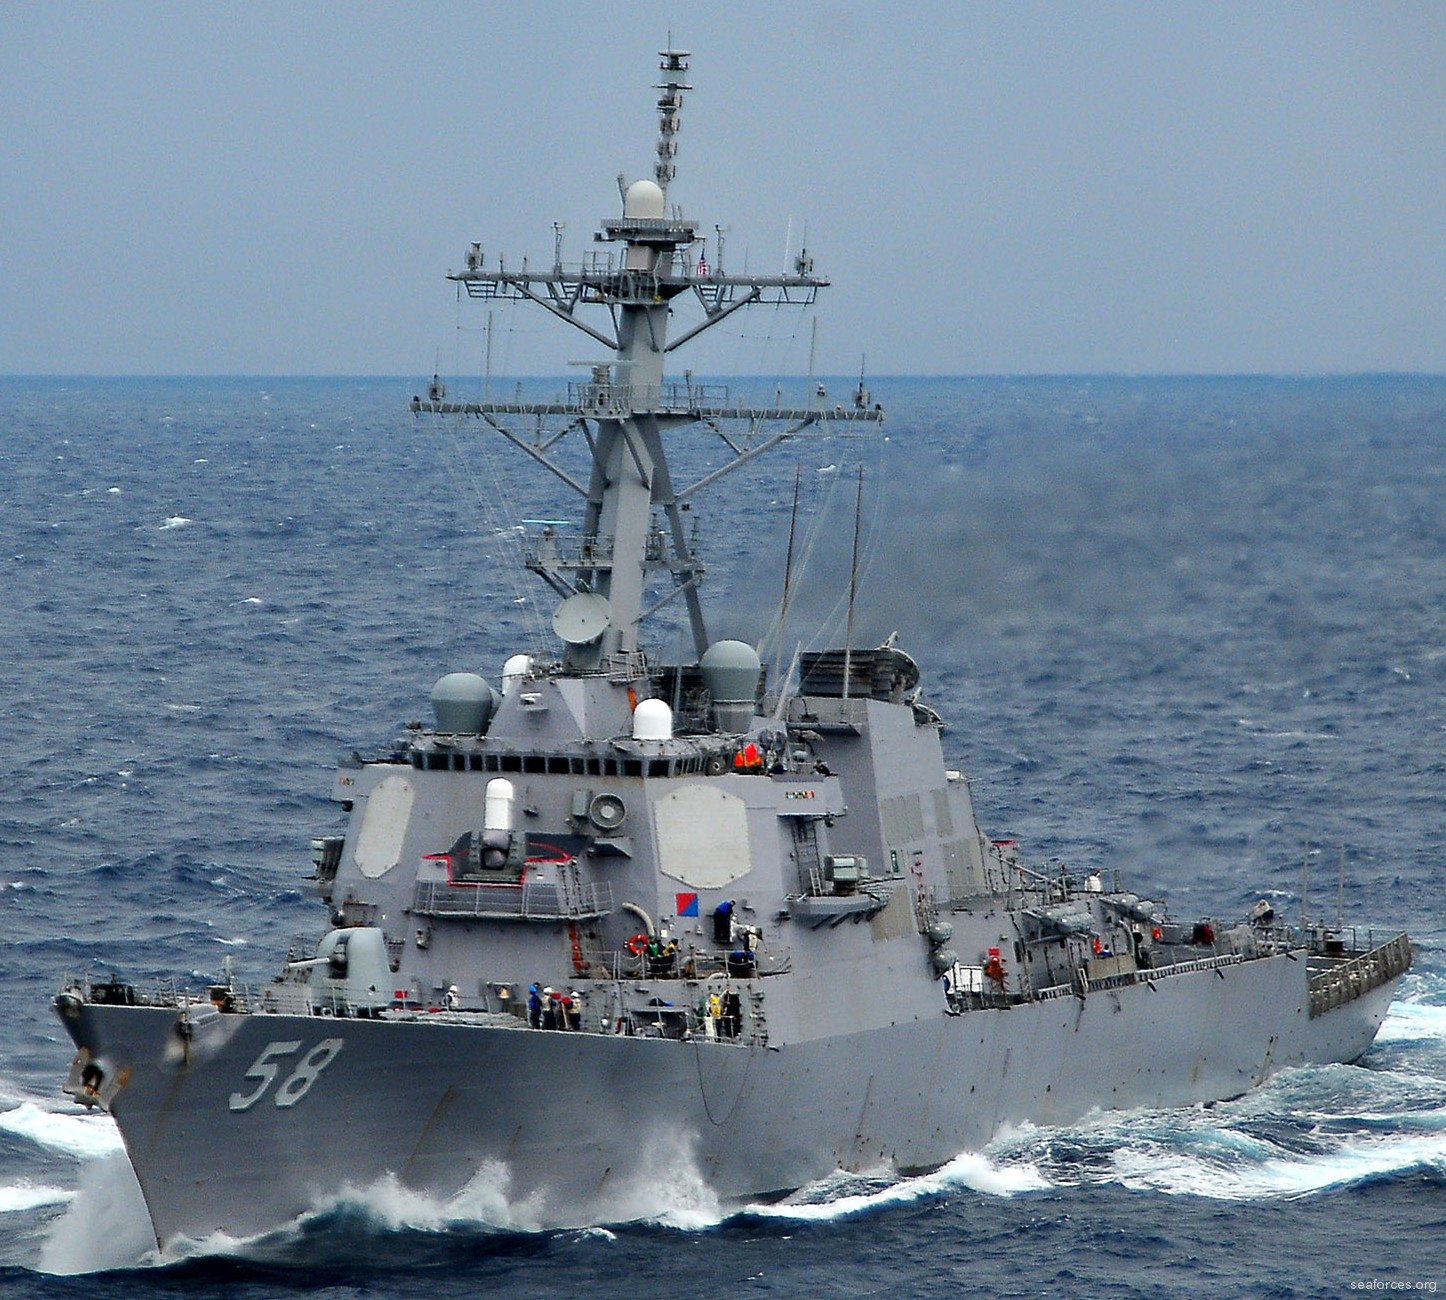 ddg-58 uss laboon guided missile destroyer us navy 63